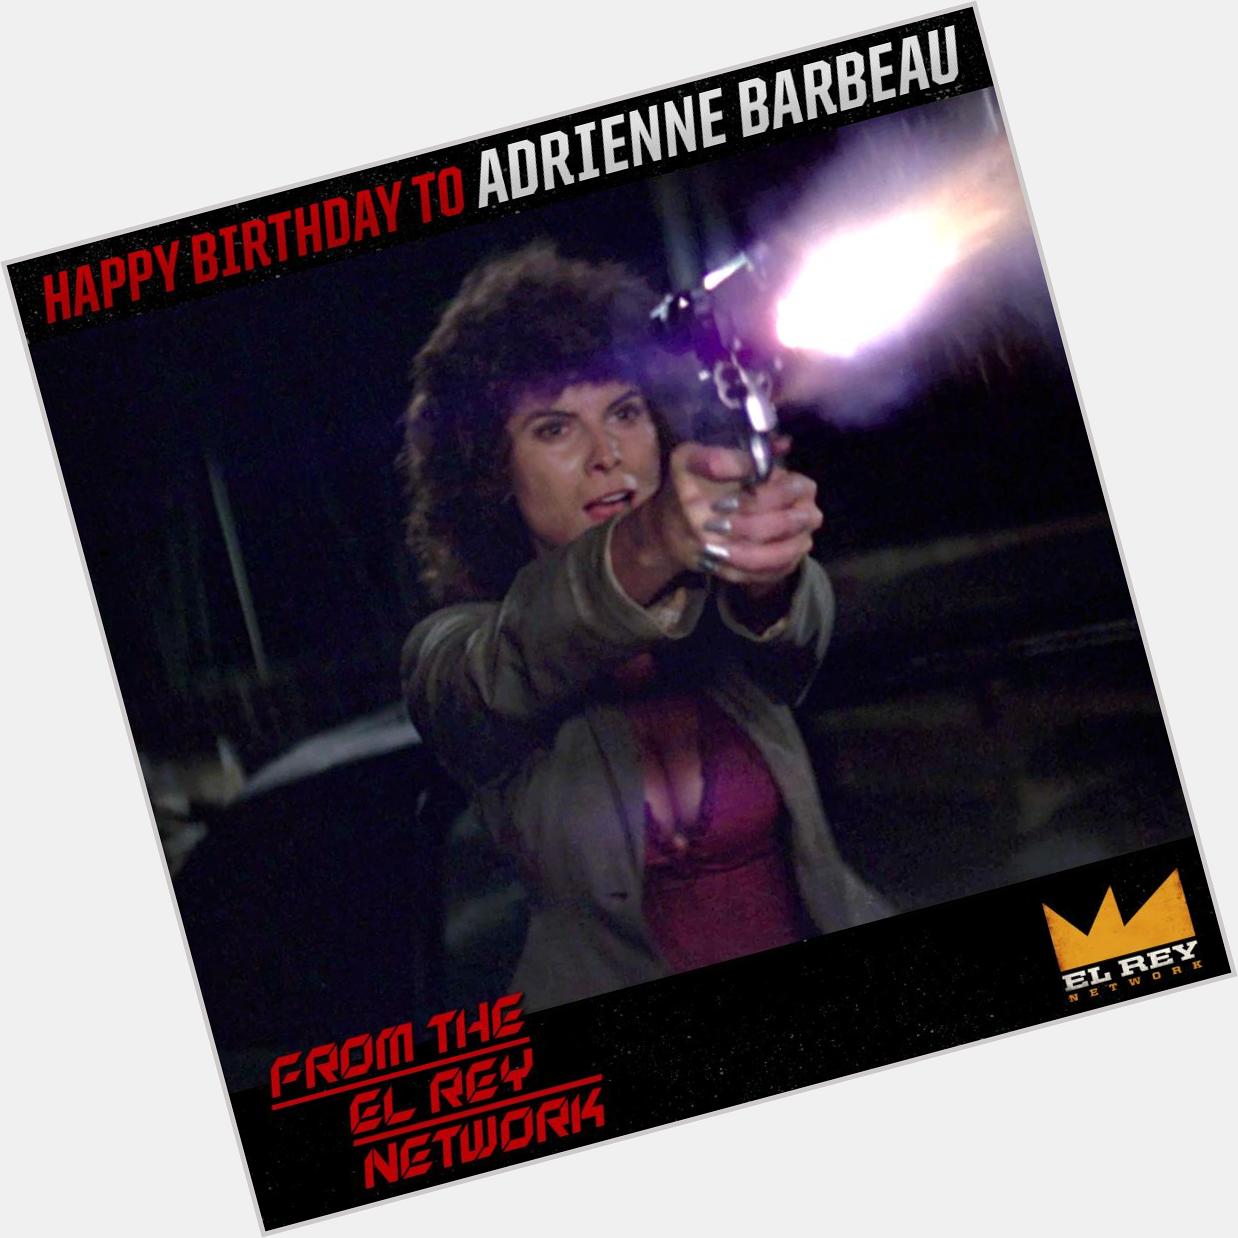 Happy birthday to 80s horror icon and badass beauty, Adrienne Barbeau!   